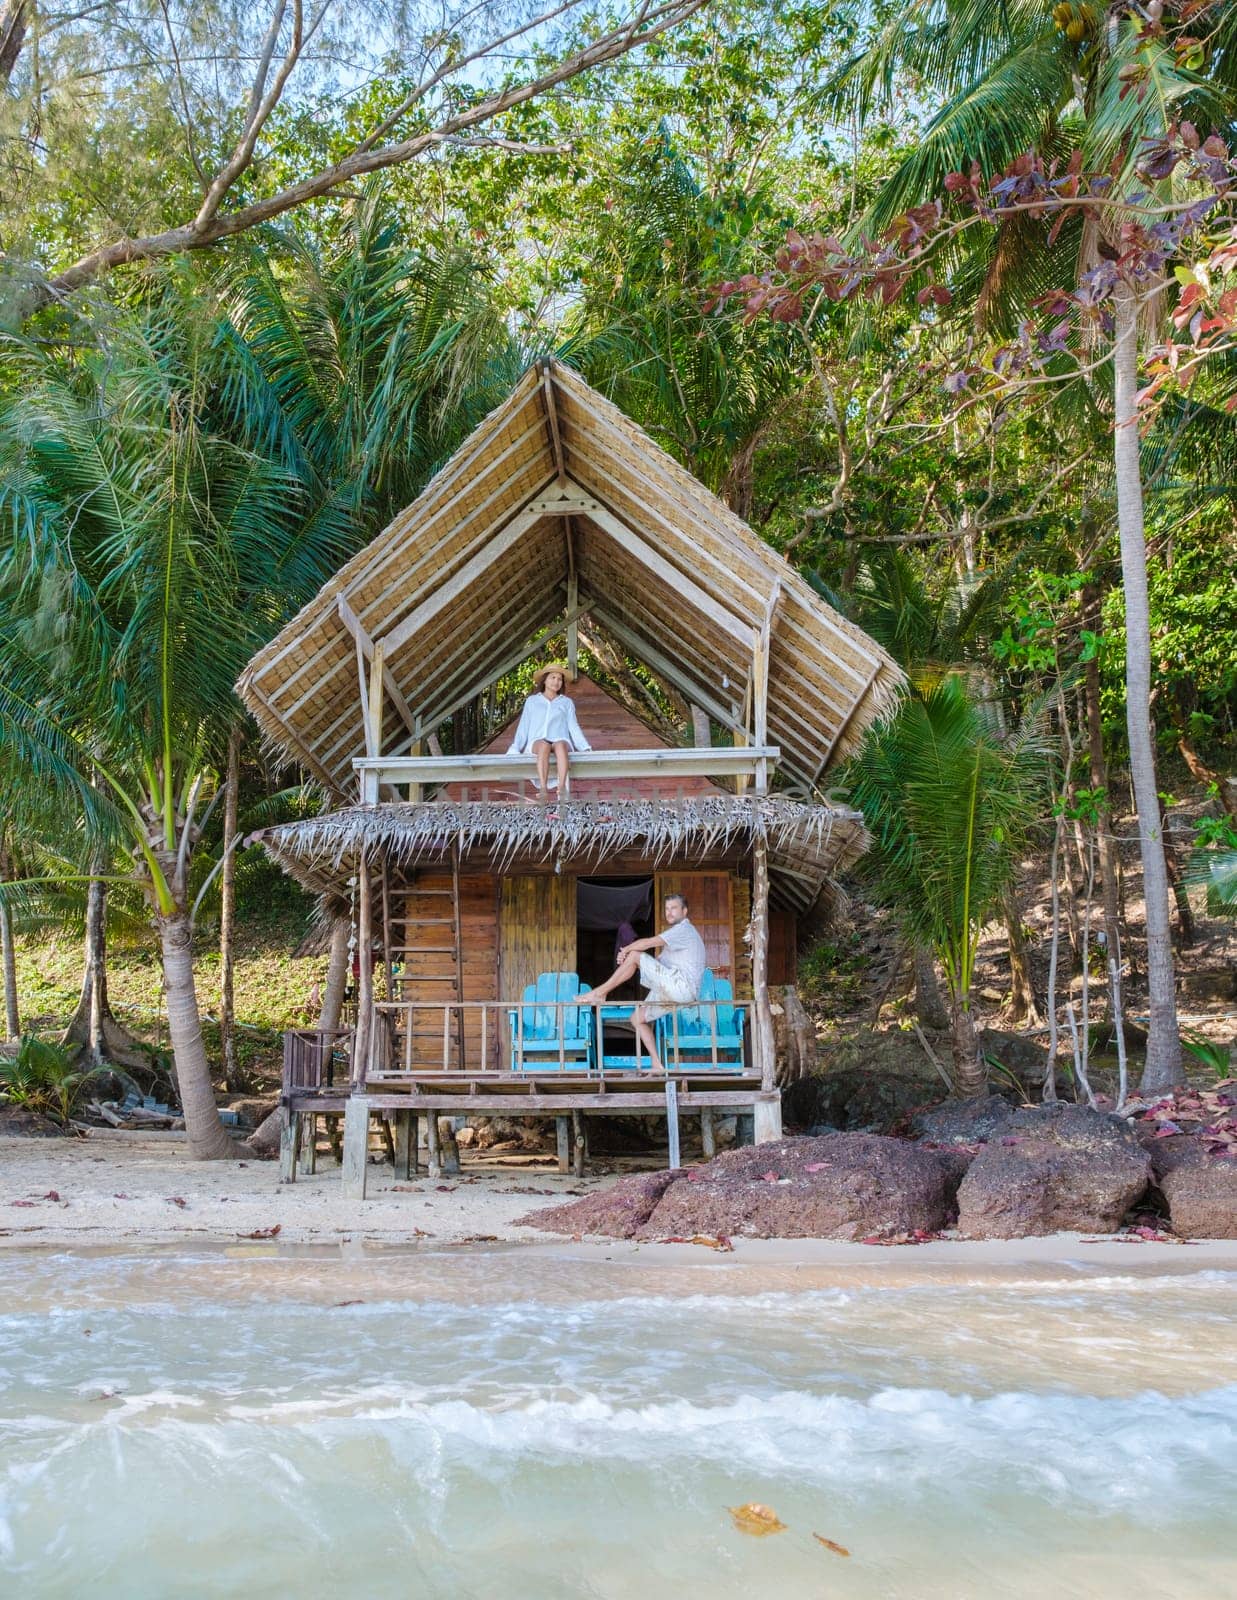 Koh Wai Island Trat Thailand near Koh Chang with a wooden bamboo hut bungalow on the beach by fokkebok